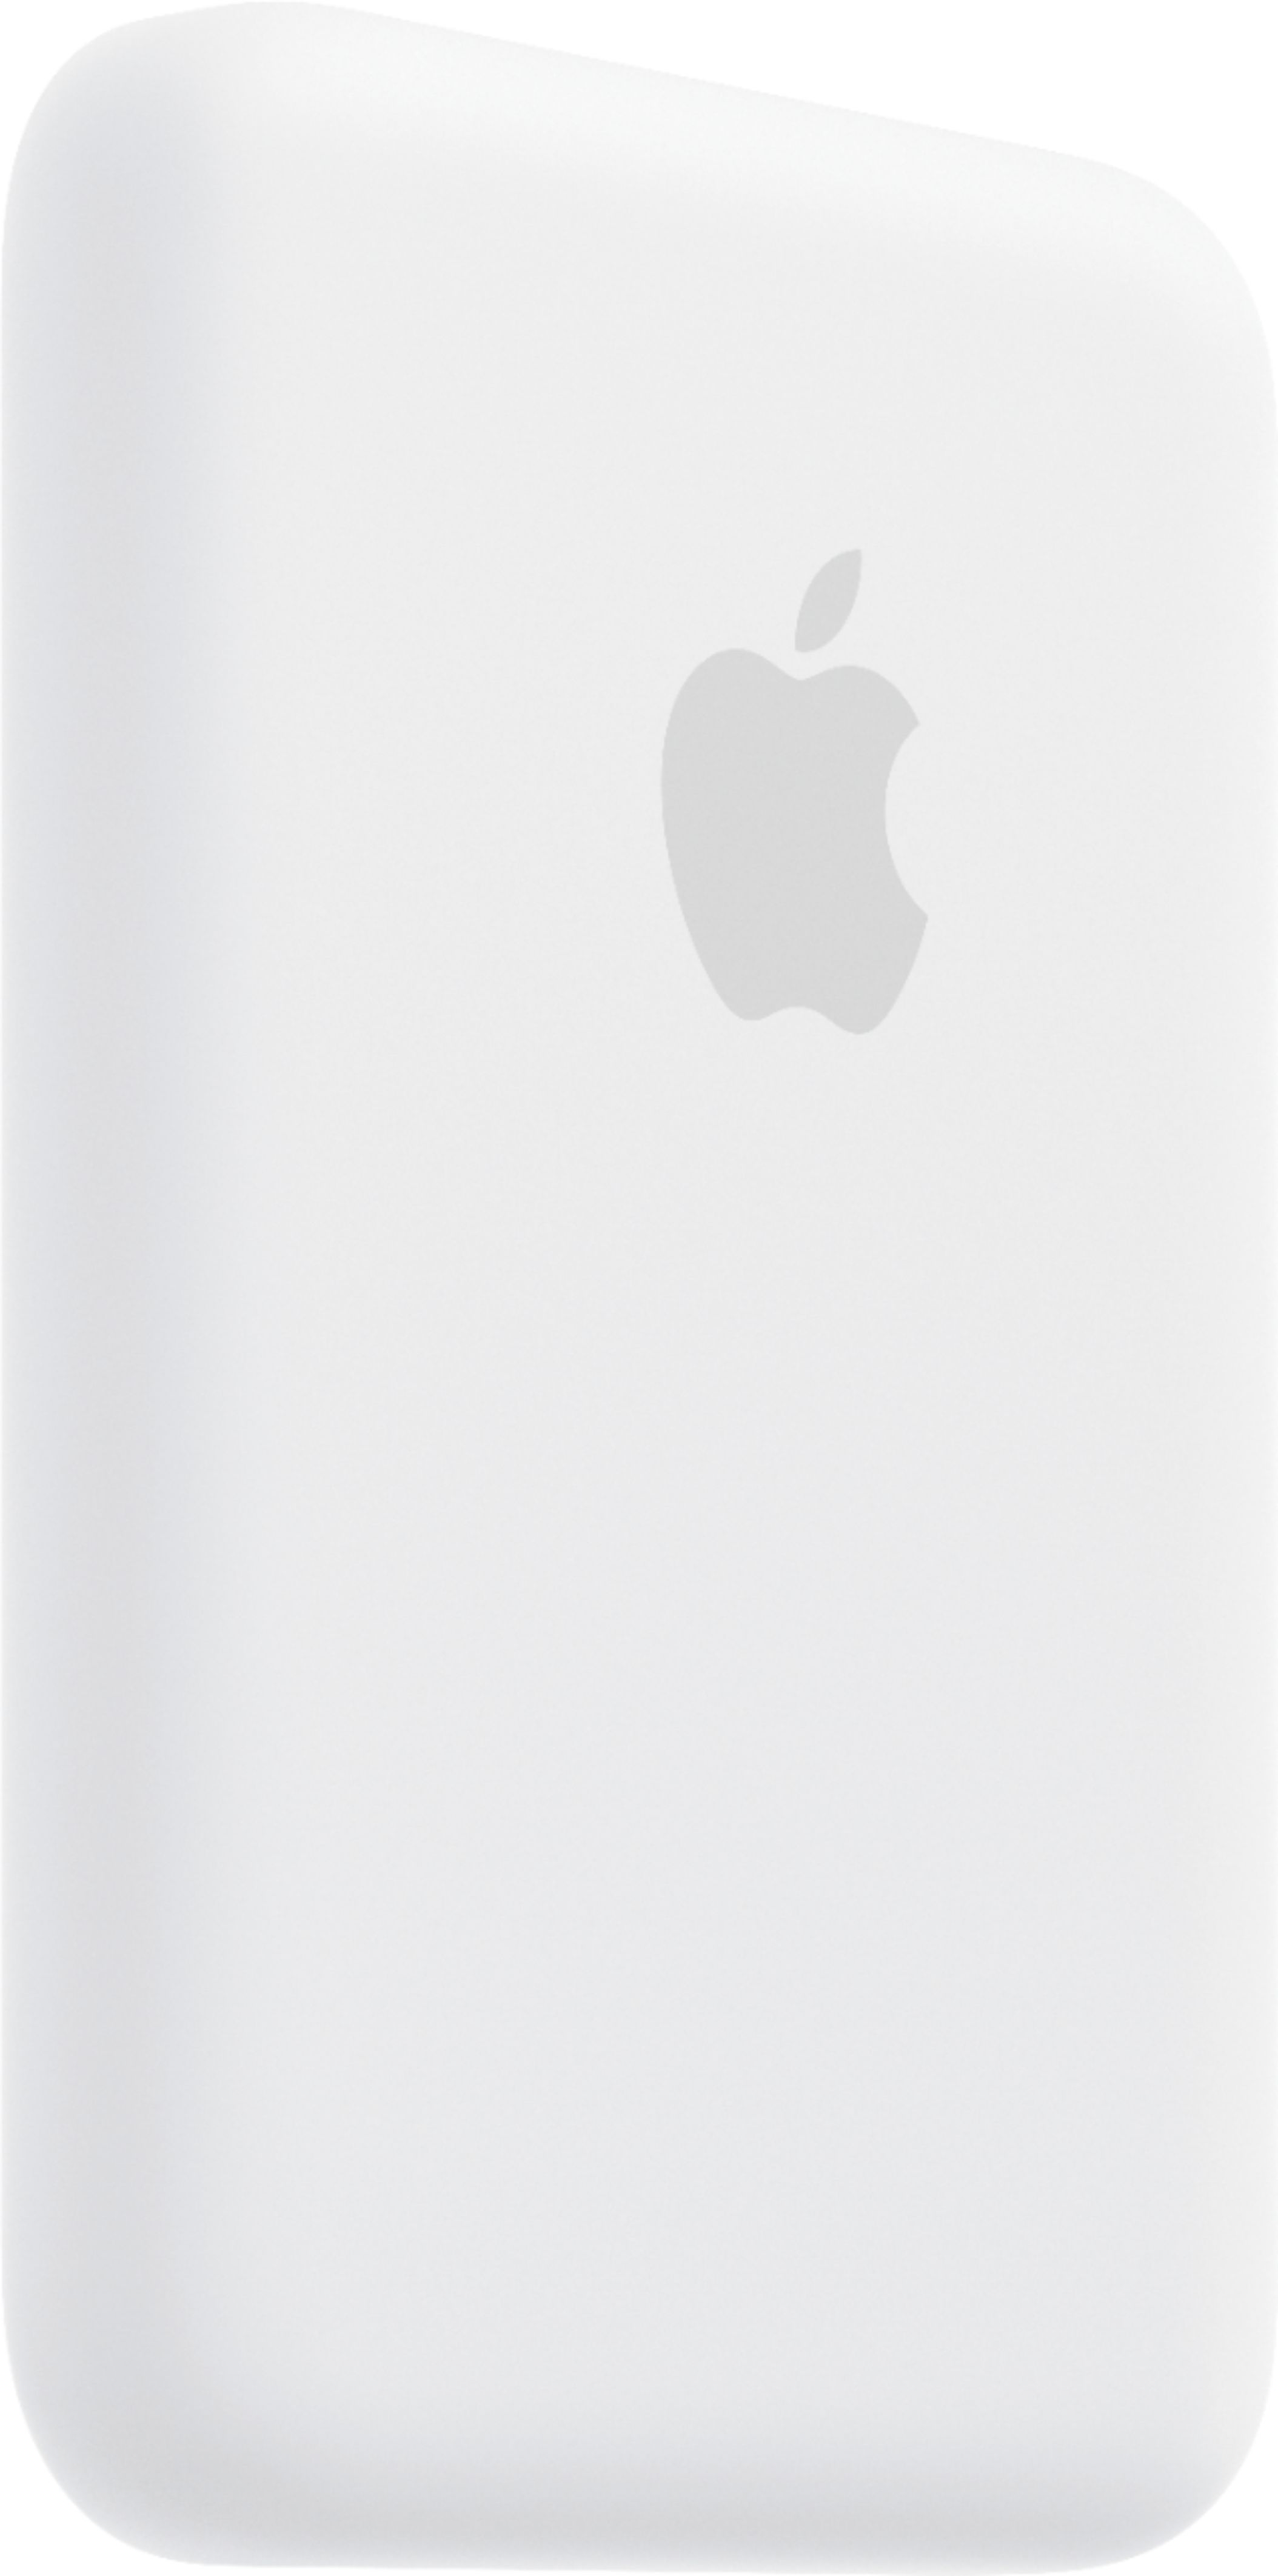 Official Apple MagSafe Battery Pack for iPhone 12 now available -  MSPoweruser